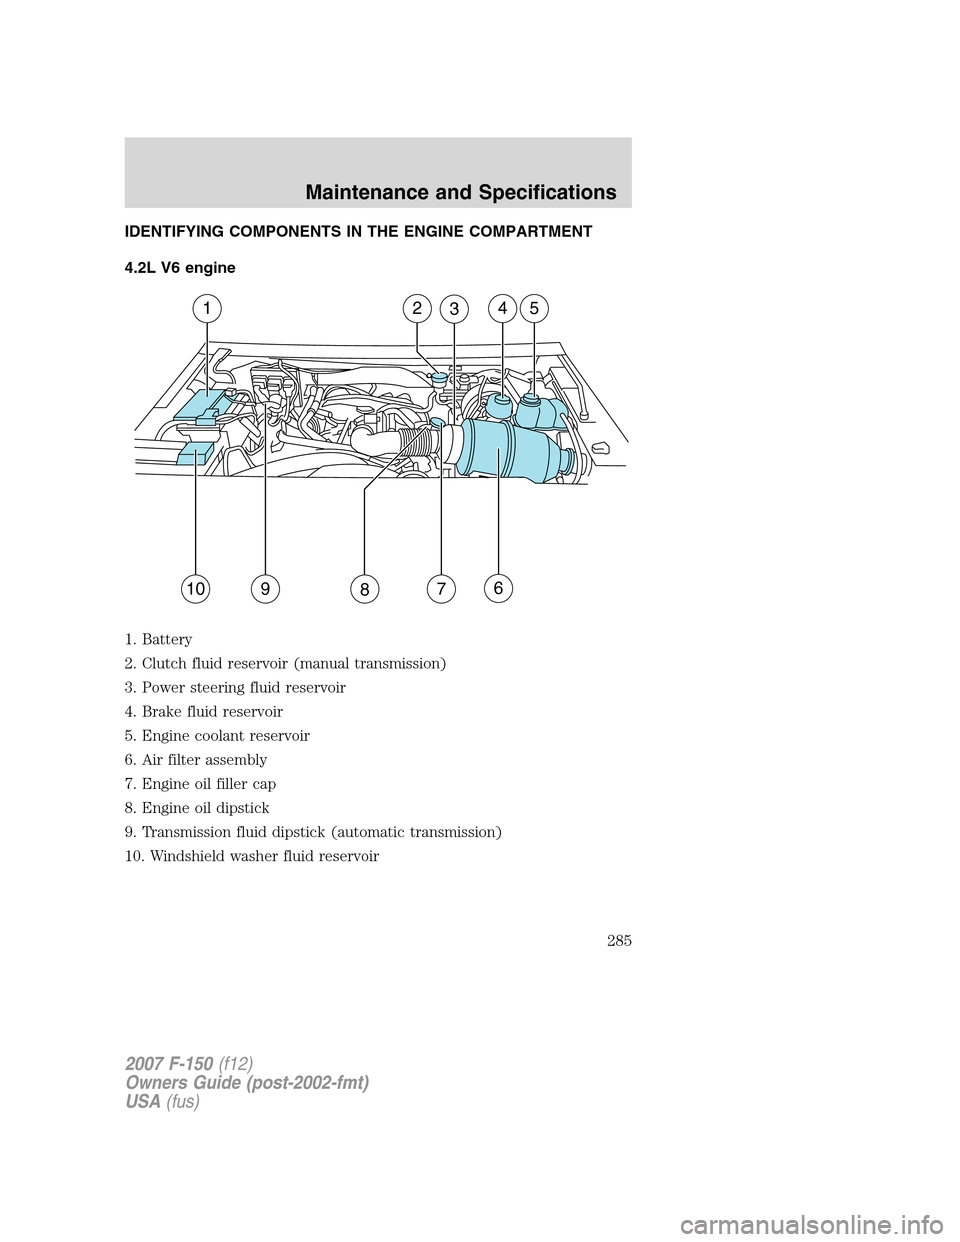 FORD F150 2007 11.G Owners Manual IDENTIFYING COMPONENTS IN THE ENGINE COMPARTMENT
4.2L V6 engine
1. Battery
2. Clutch fluid reservoir (manual transmission)
3. Power steering fluid reservoir
4. Brake fluid reservoir
5. Engine coolant 